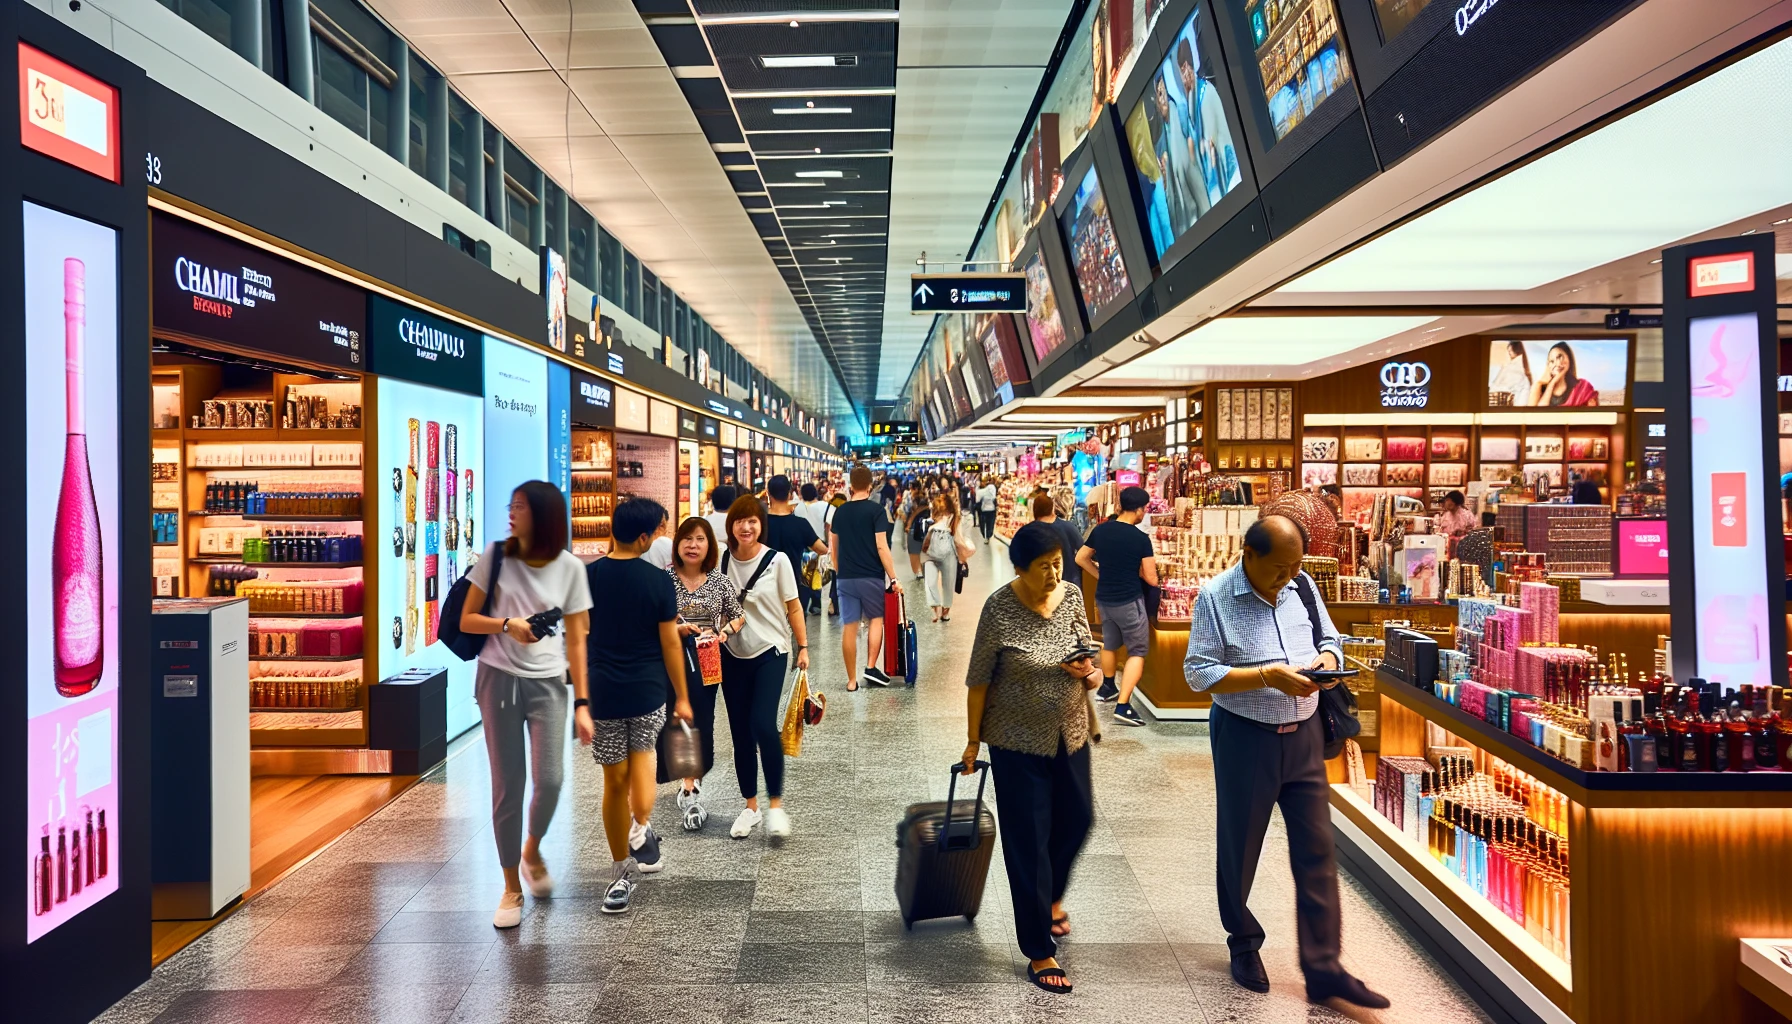 Duty-free shopping area at the airport